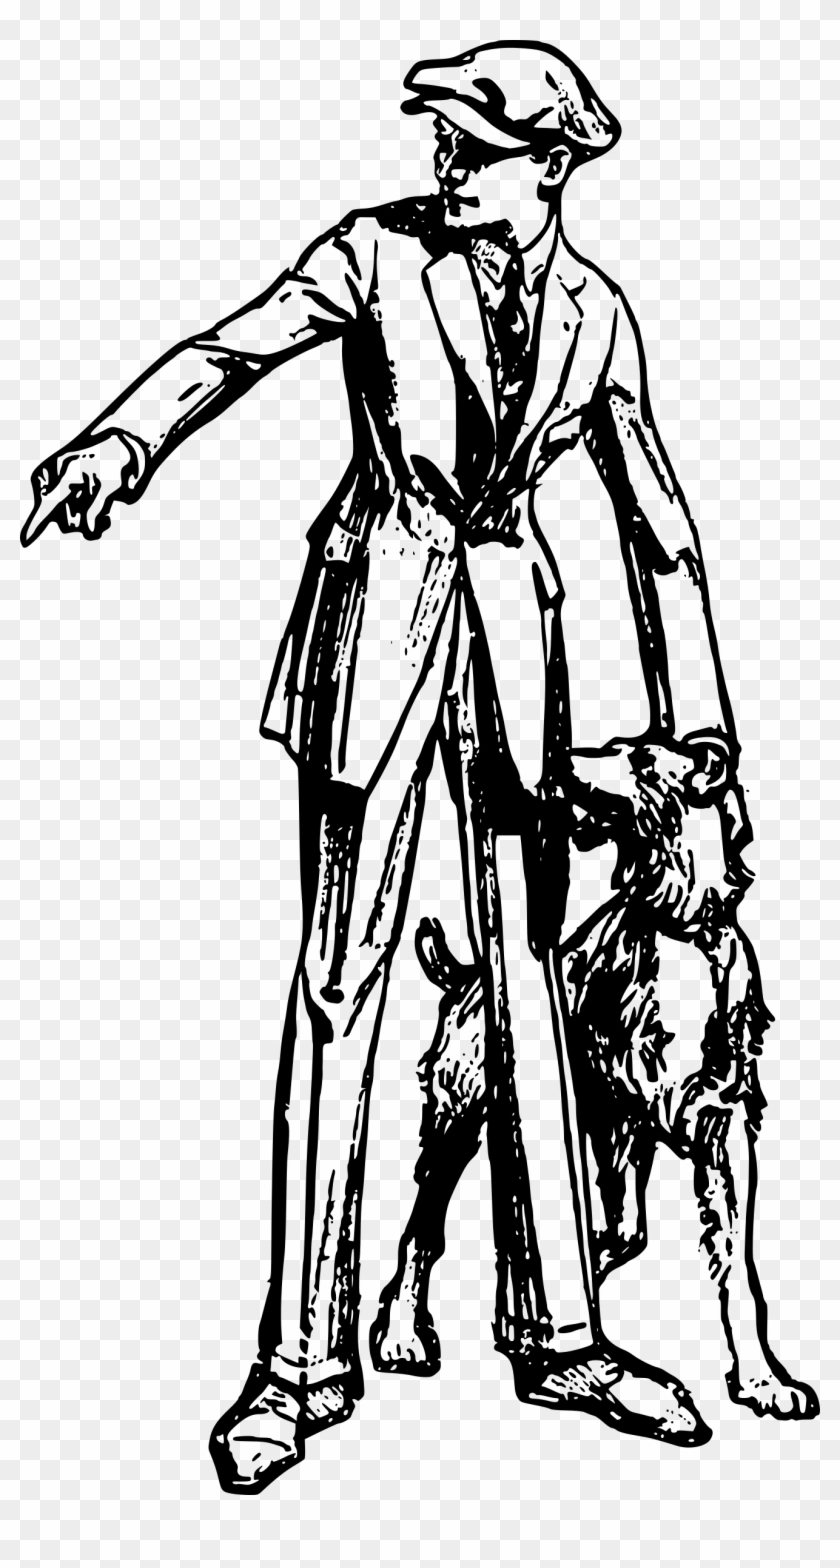 Boy In A Suit With A Dog - Suit #240901